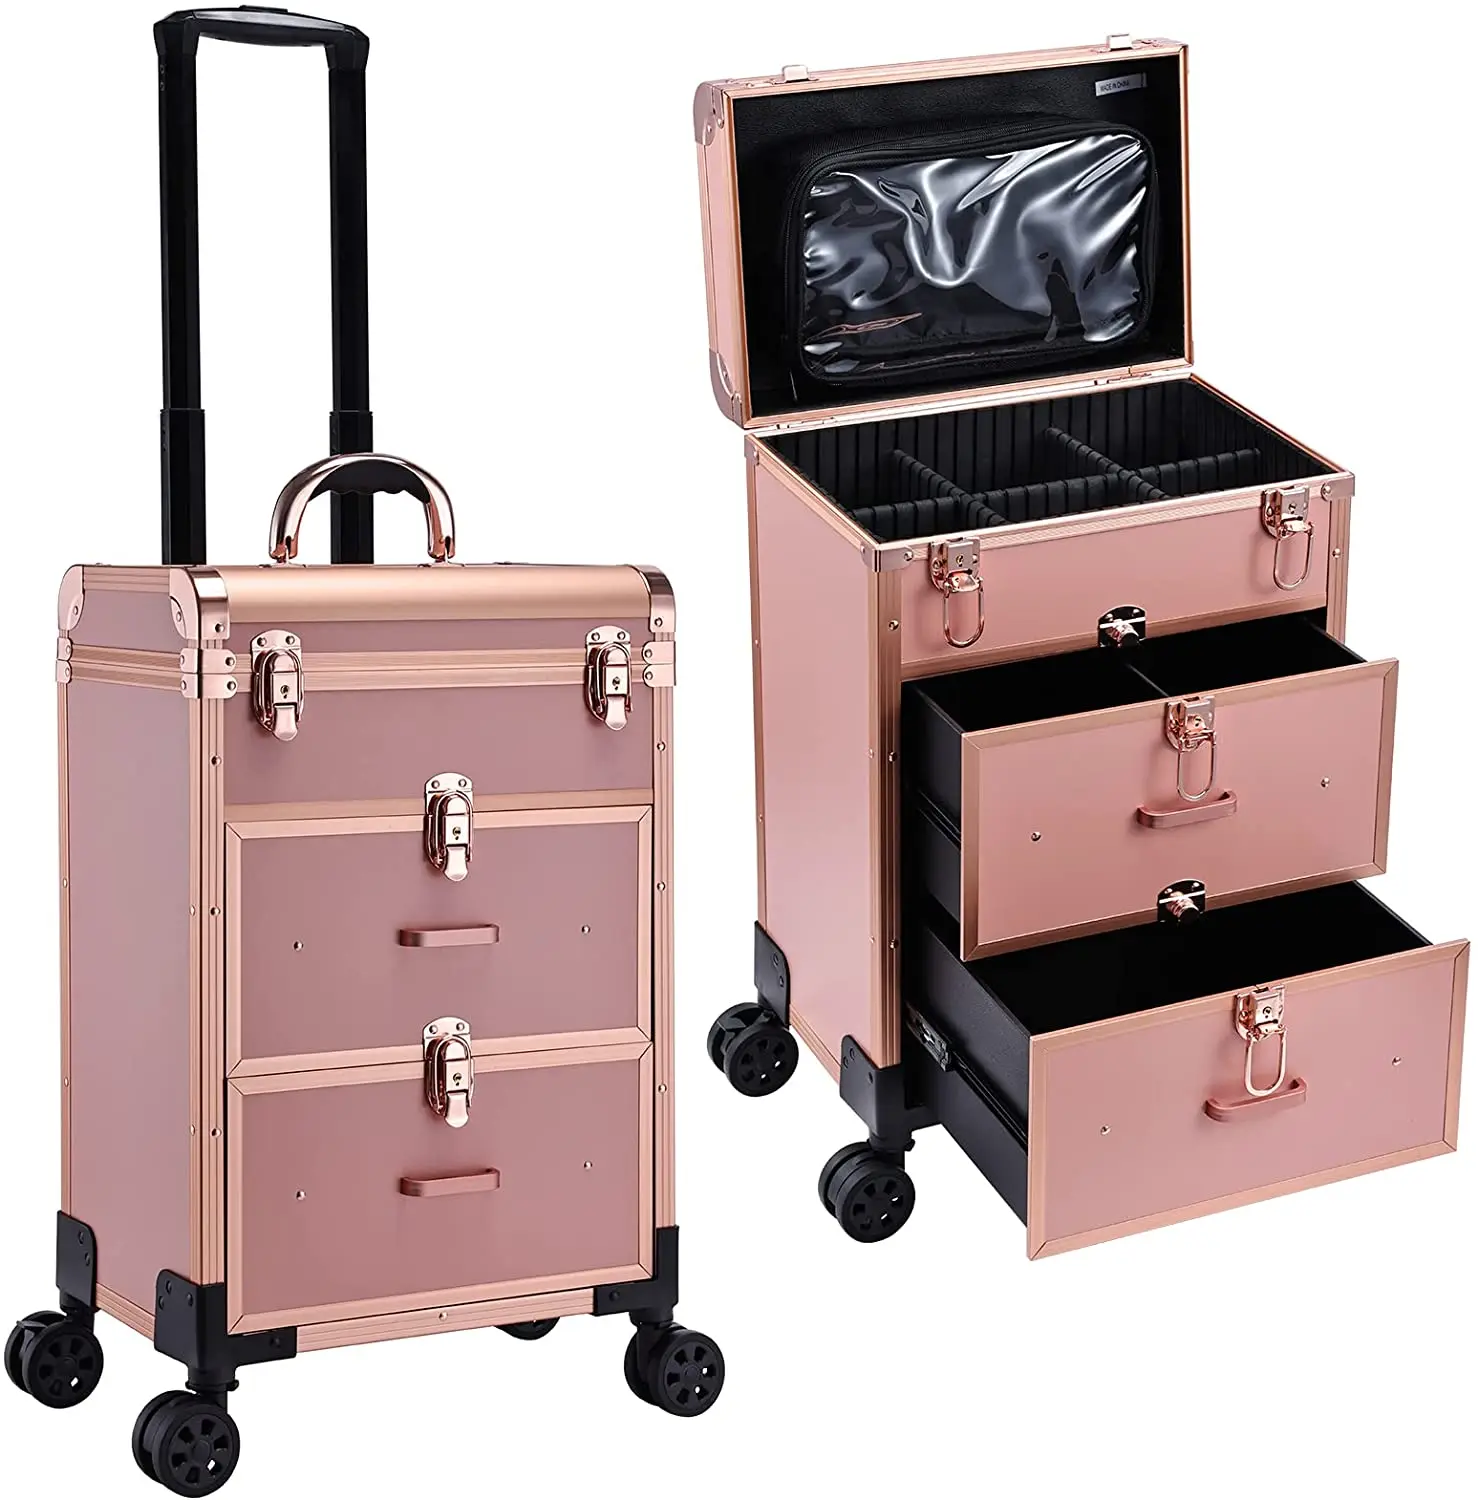 ært Himlen filter Professional Rolling Makeup Train Case With Drawers,Large Cosmetic Trolley  With Locks,Cosmetics Storage Organizer Make Up Case - Buy Professional  Rolling Makeup Train Case With Drawers,Large Cosmetic Trolley With Locks, Cosmetics Storage Organizer Make